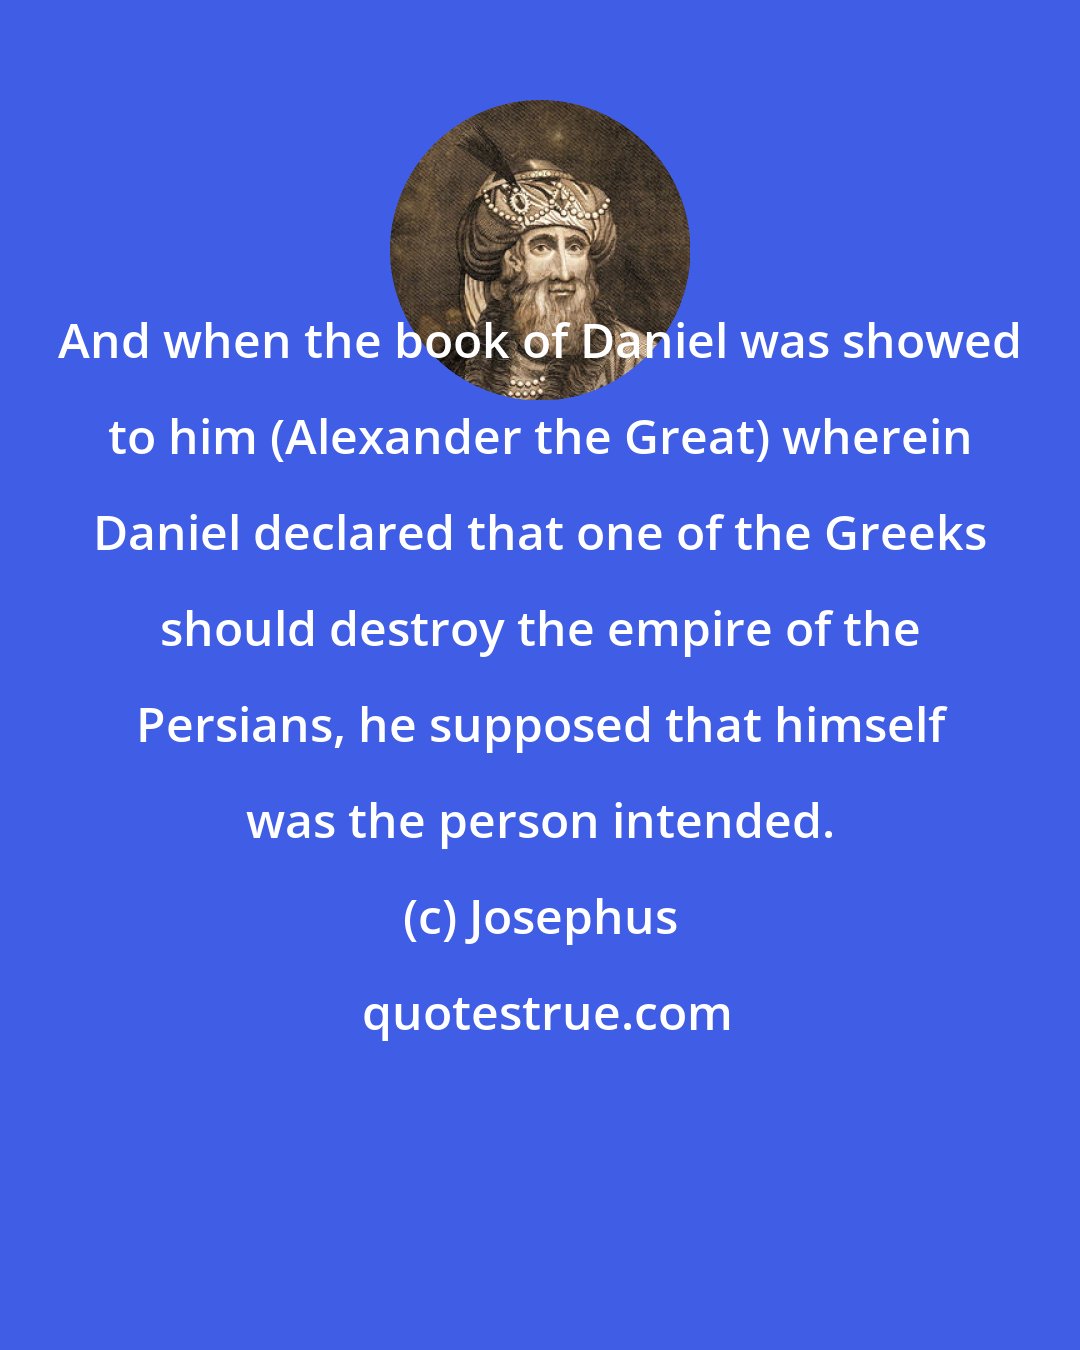 Josephus: And when the book of Daniel was showed to him (Alexander the Great) wherein Daniel declared that one of the Greeks should destroy the empire of the Persians, he supposed that himself was the person intended.